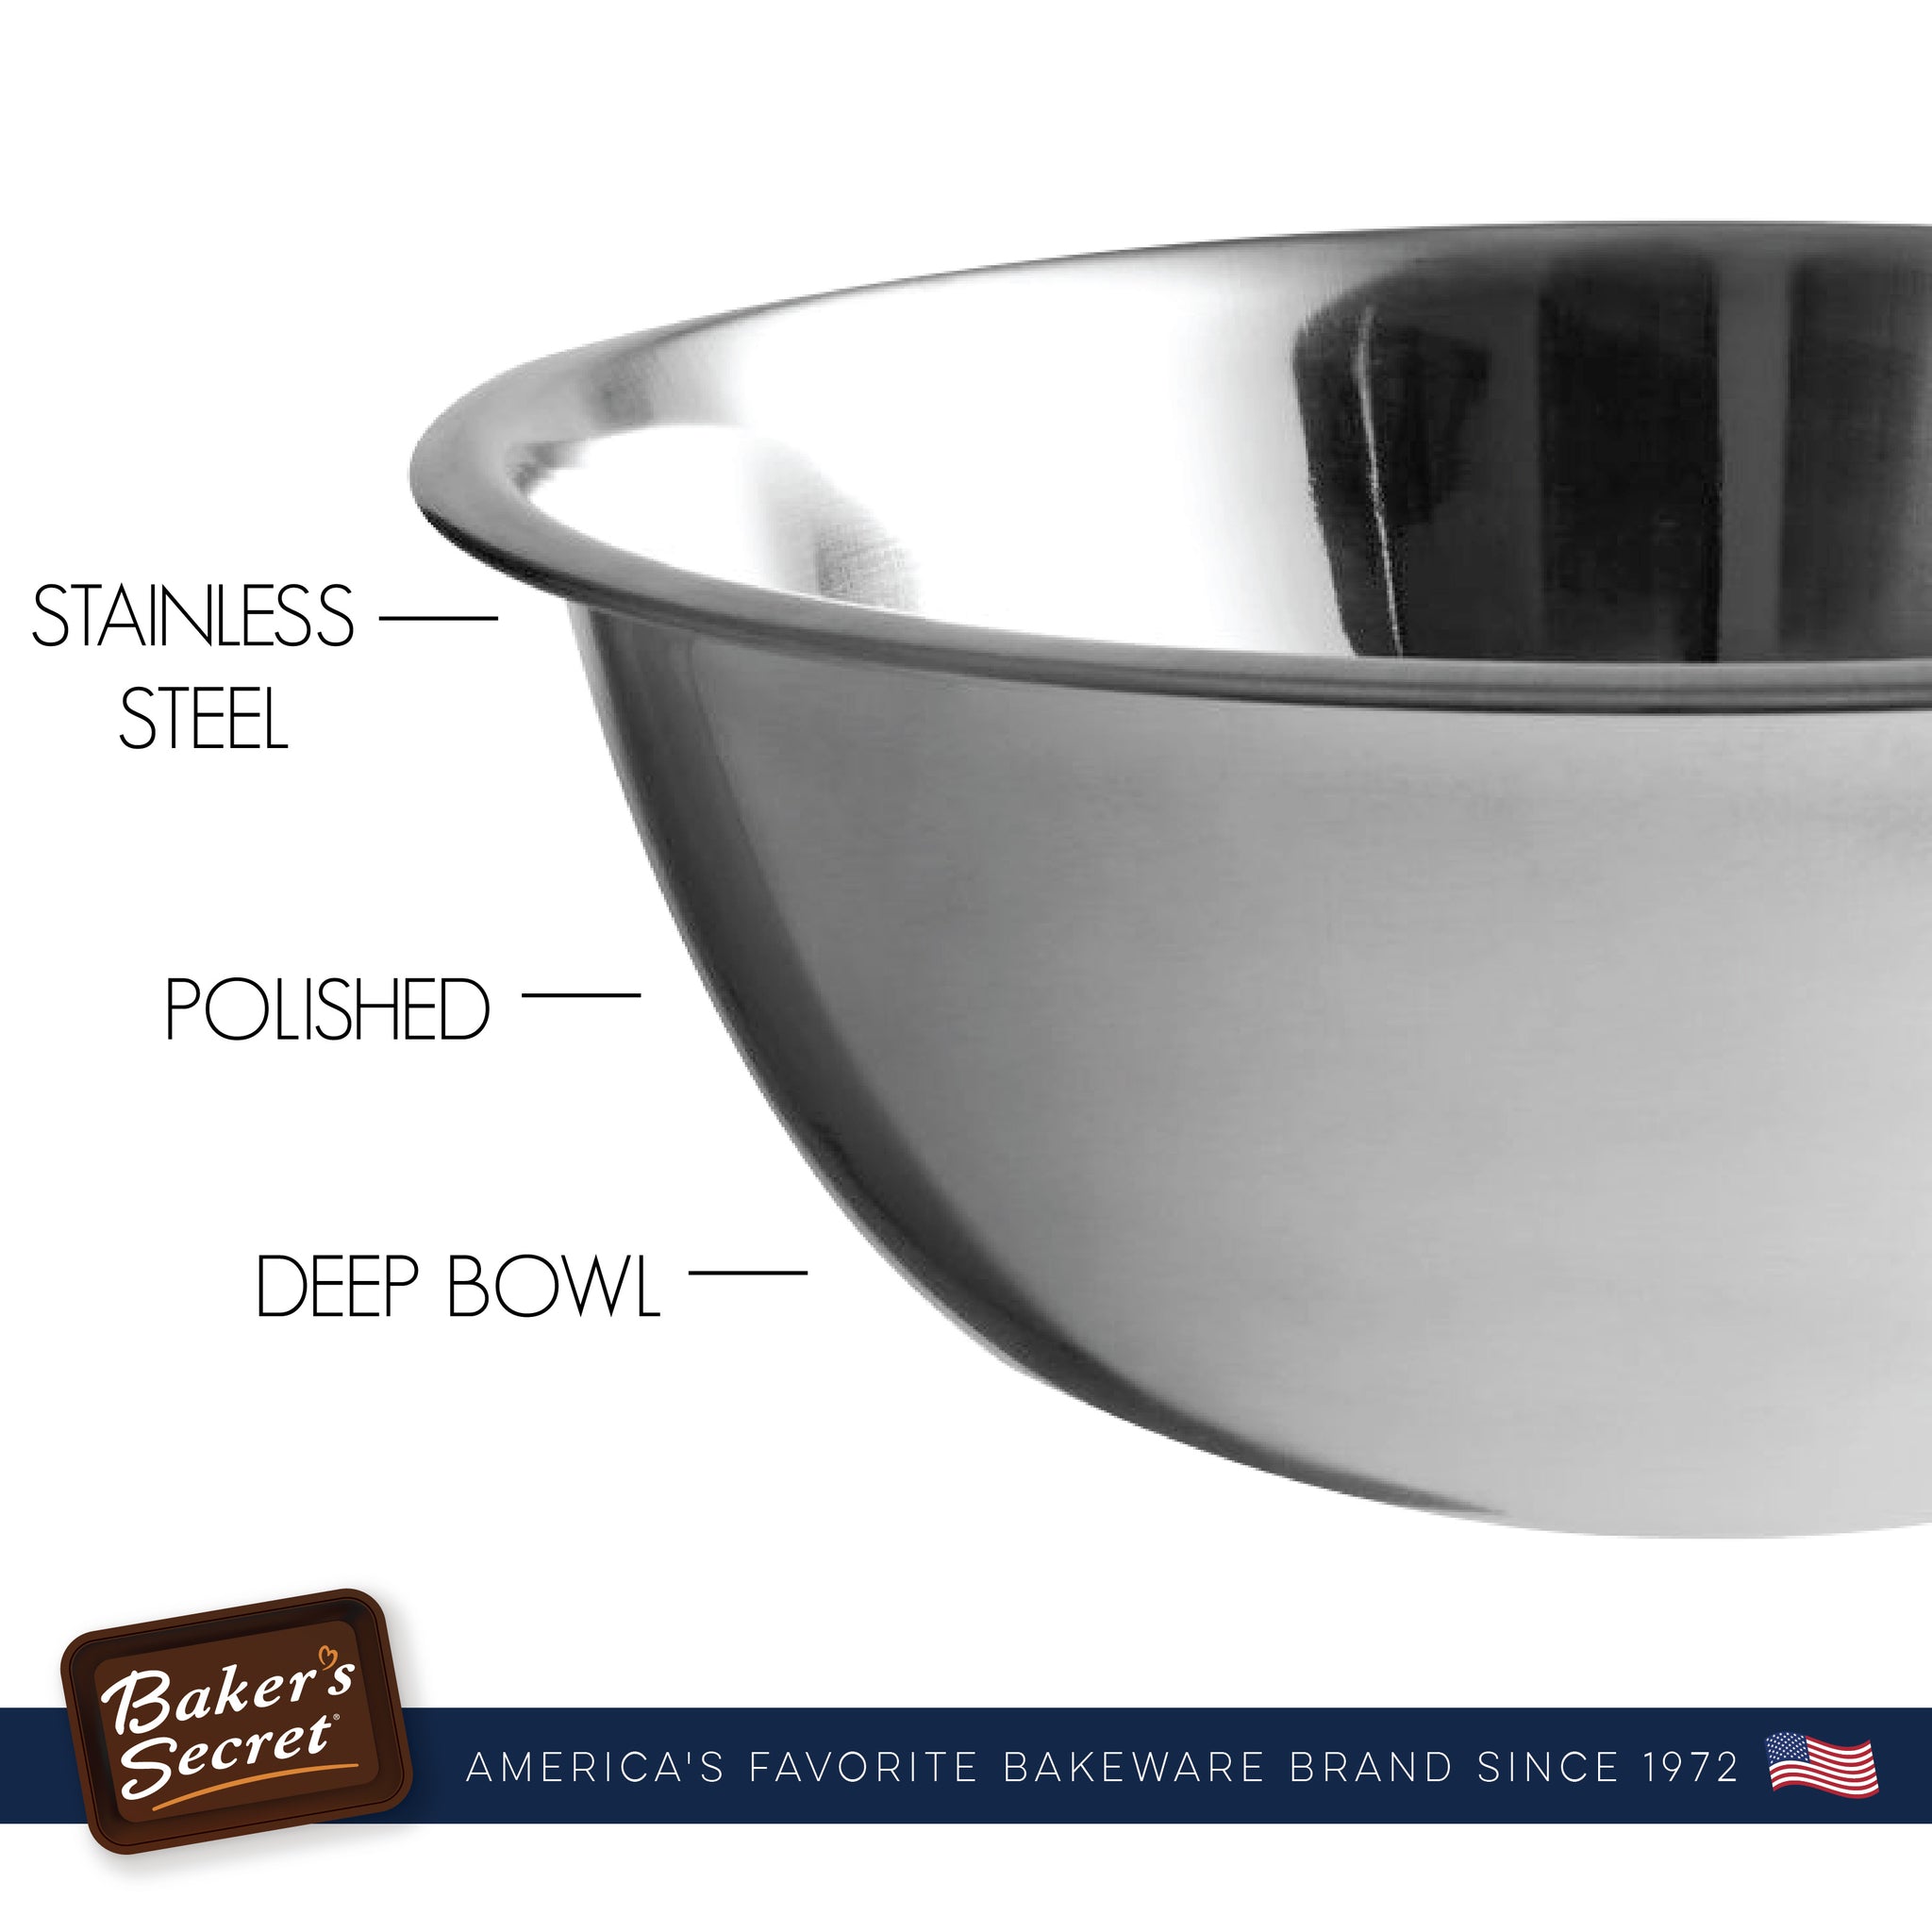 Stainless Steel Deep Mixing Bowl, 5 Quart - SANE - Sewing and Housewares